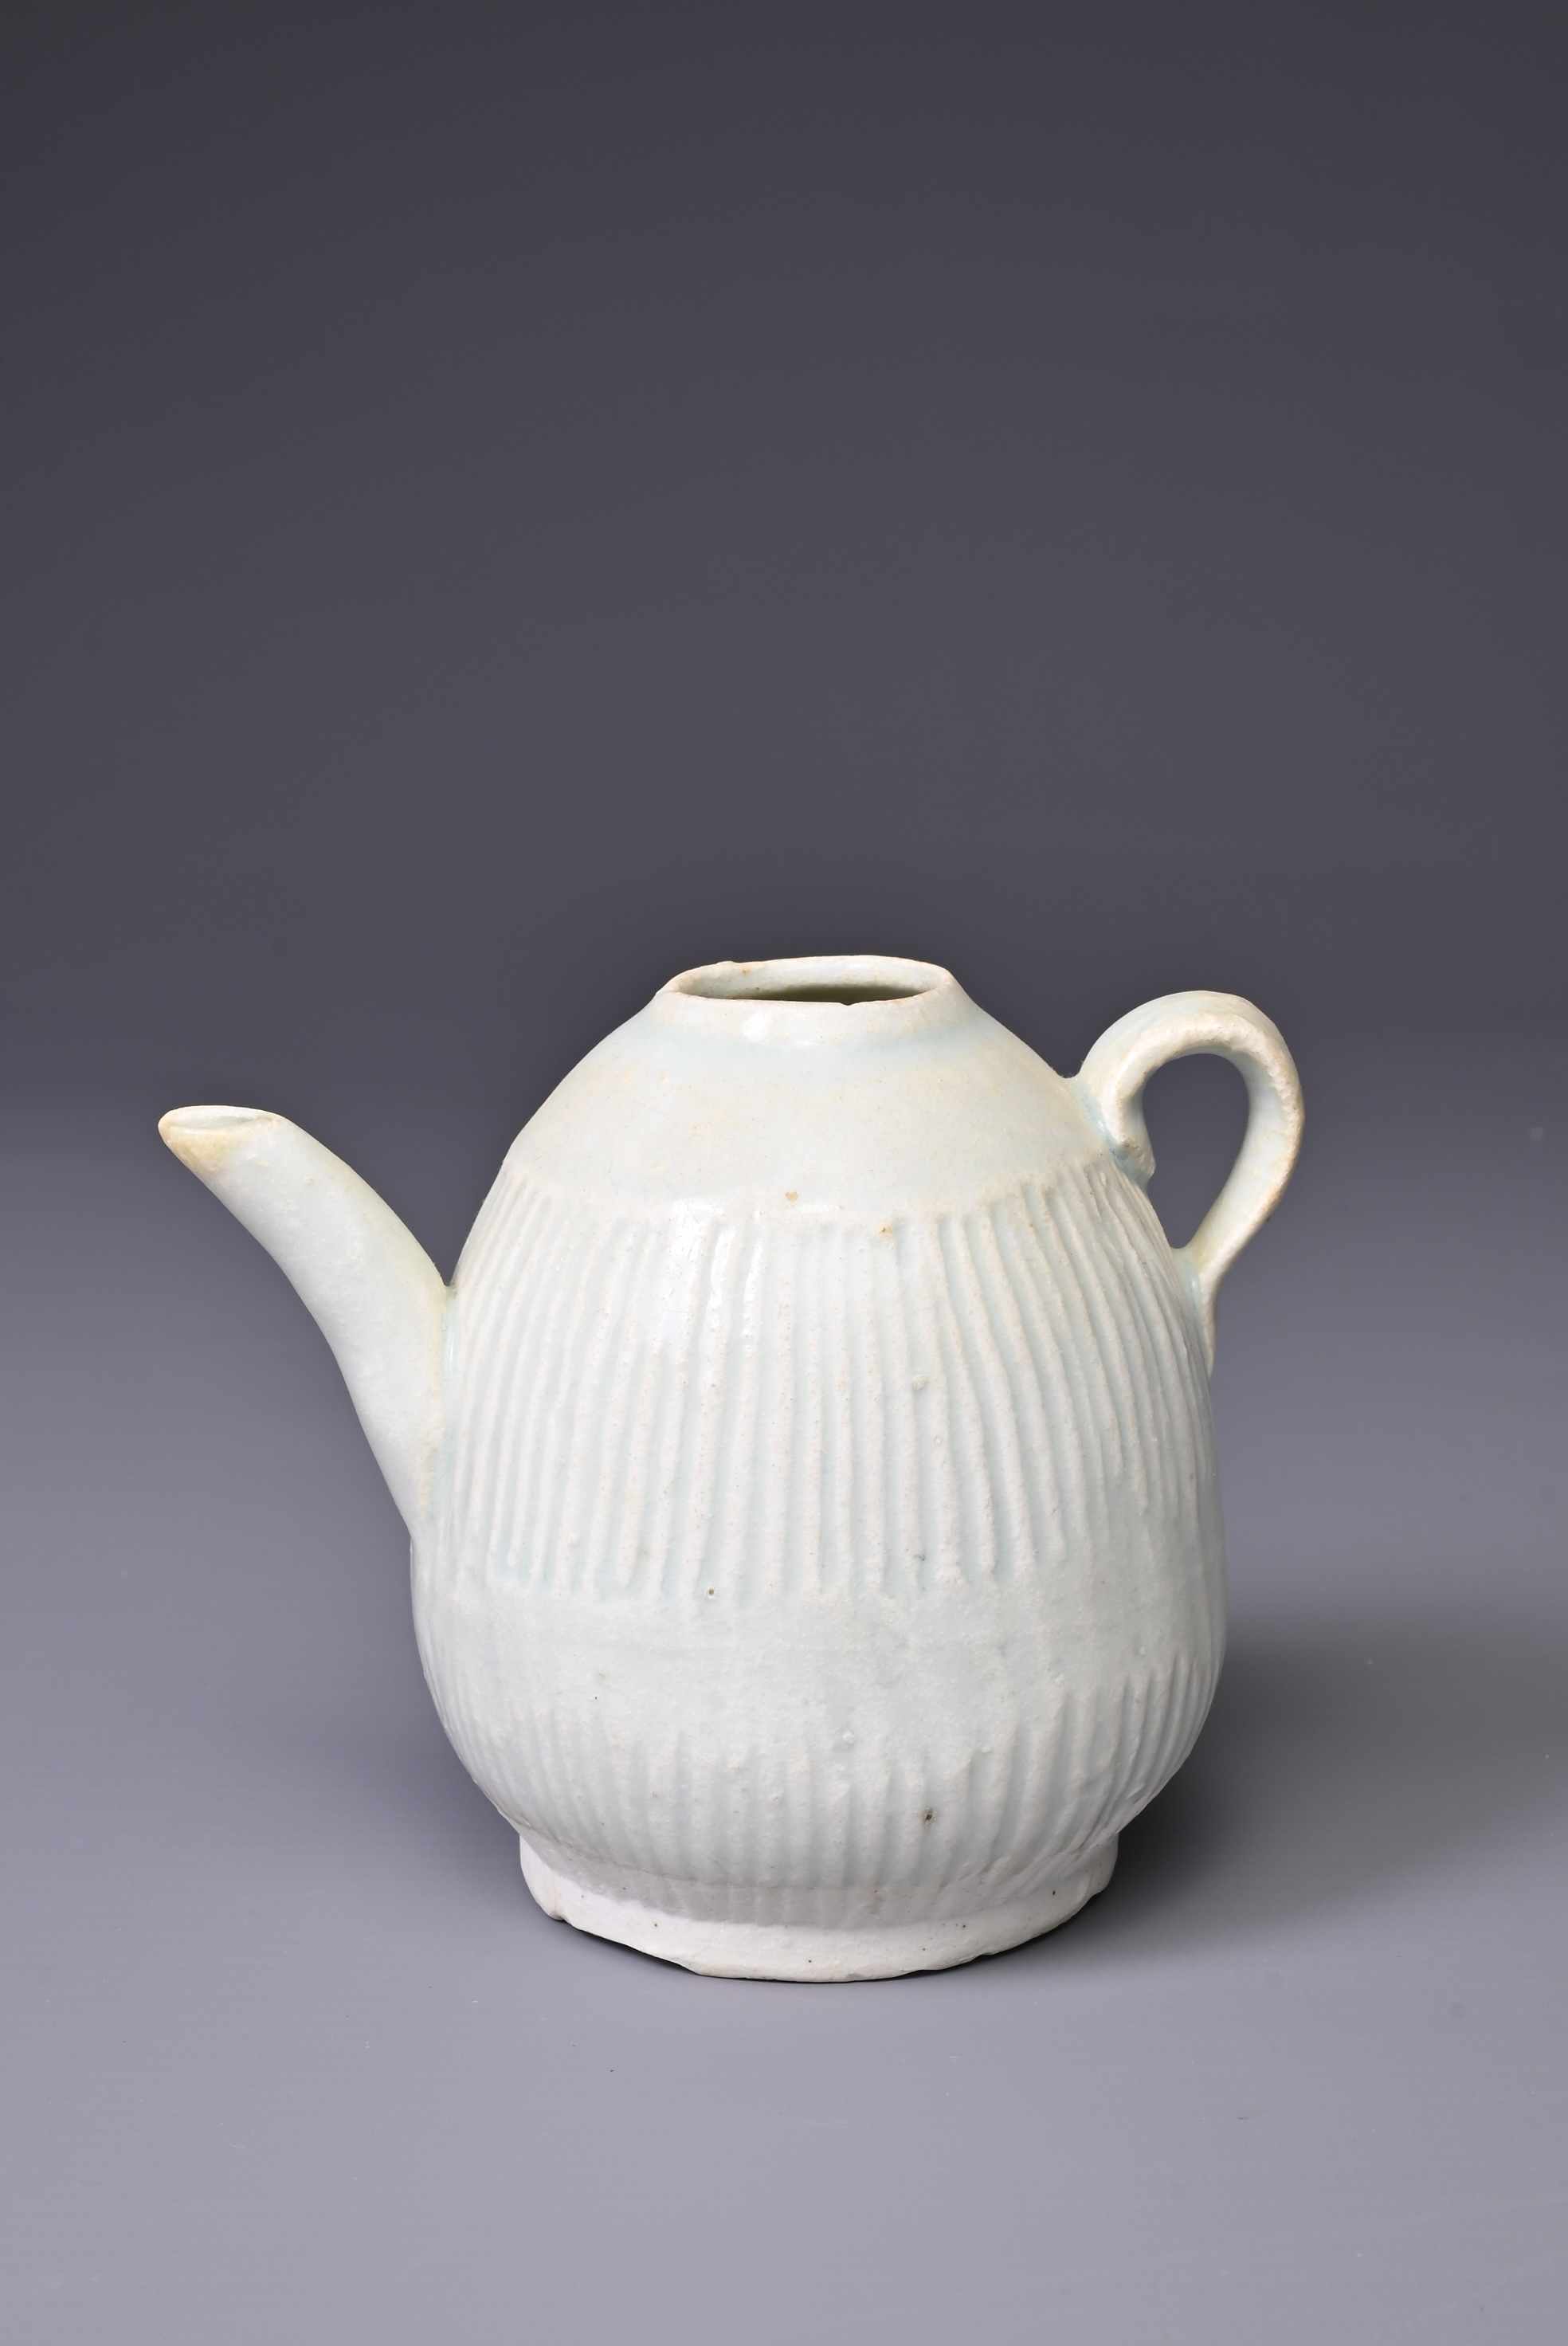 A CHINESE QINGBAI WARE EWER, SONG DYNASTY (960-1279). Finely potted ovoid body with continuous